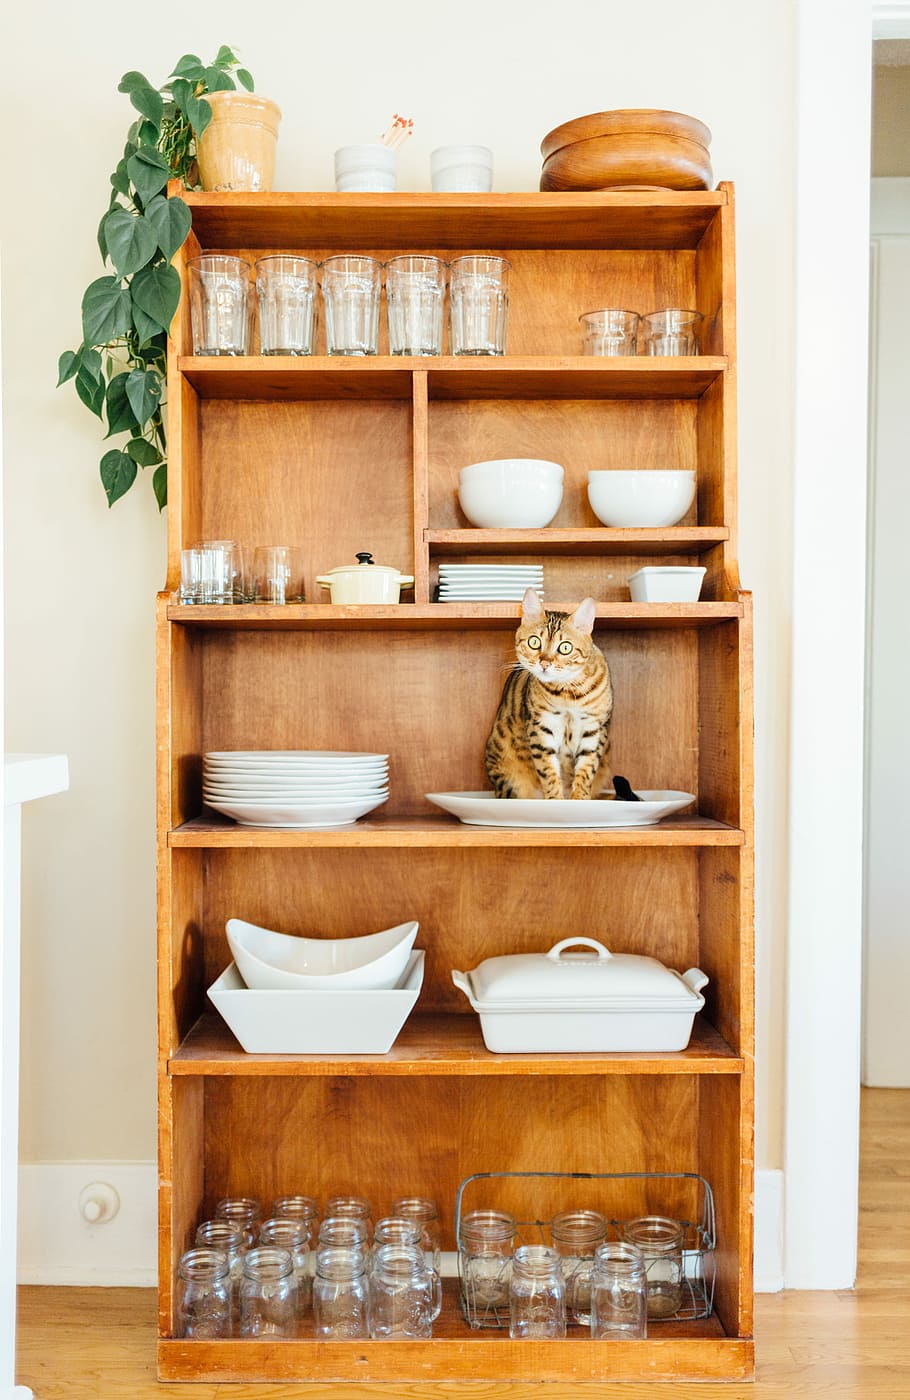 gray tabby cat on brown wooden shelves with cutleries inside house, short-coated brown cat on top of white ceramic plate